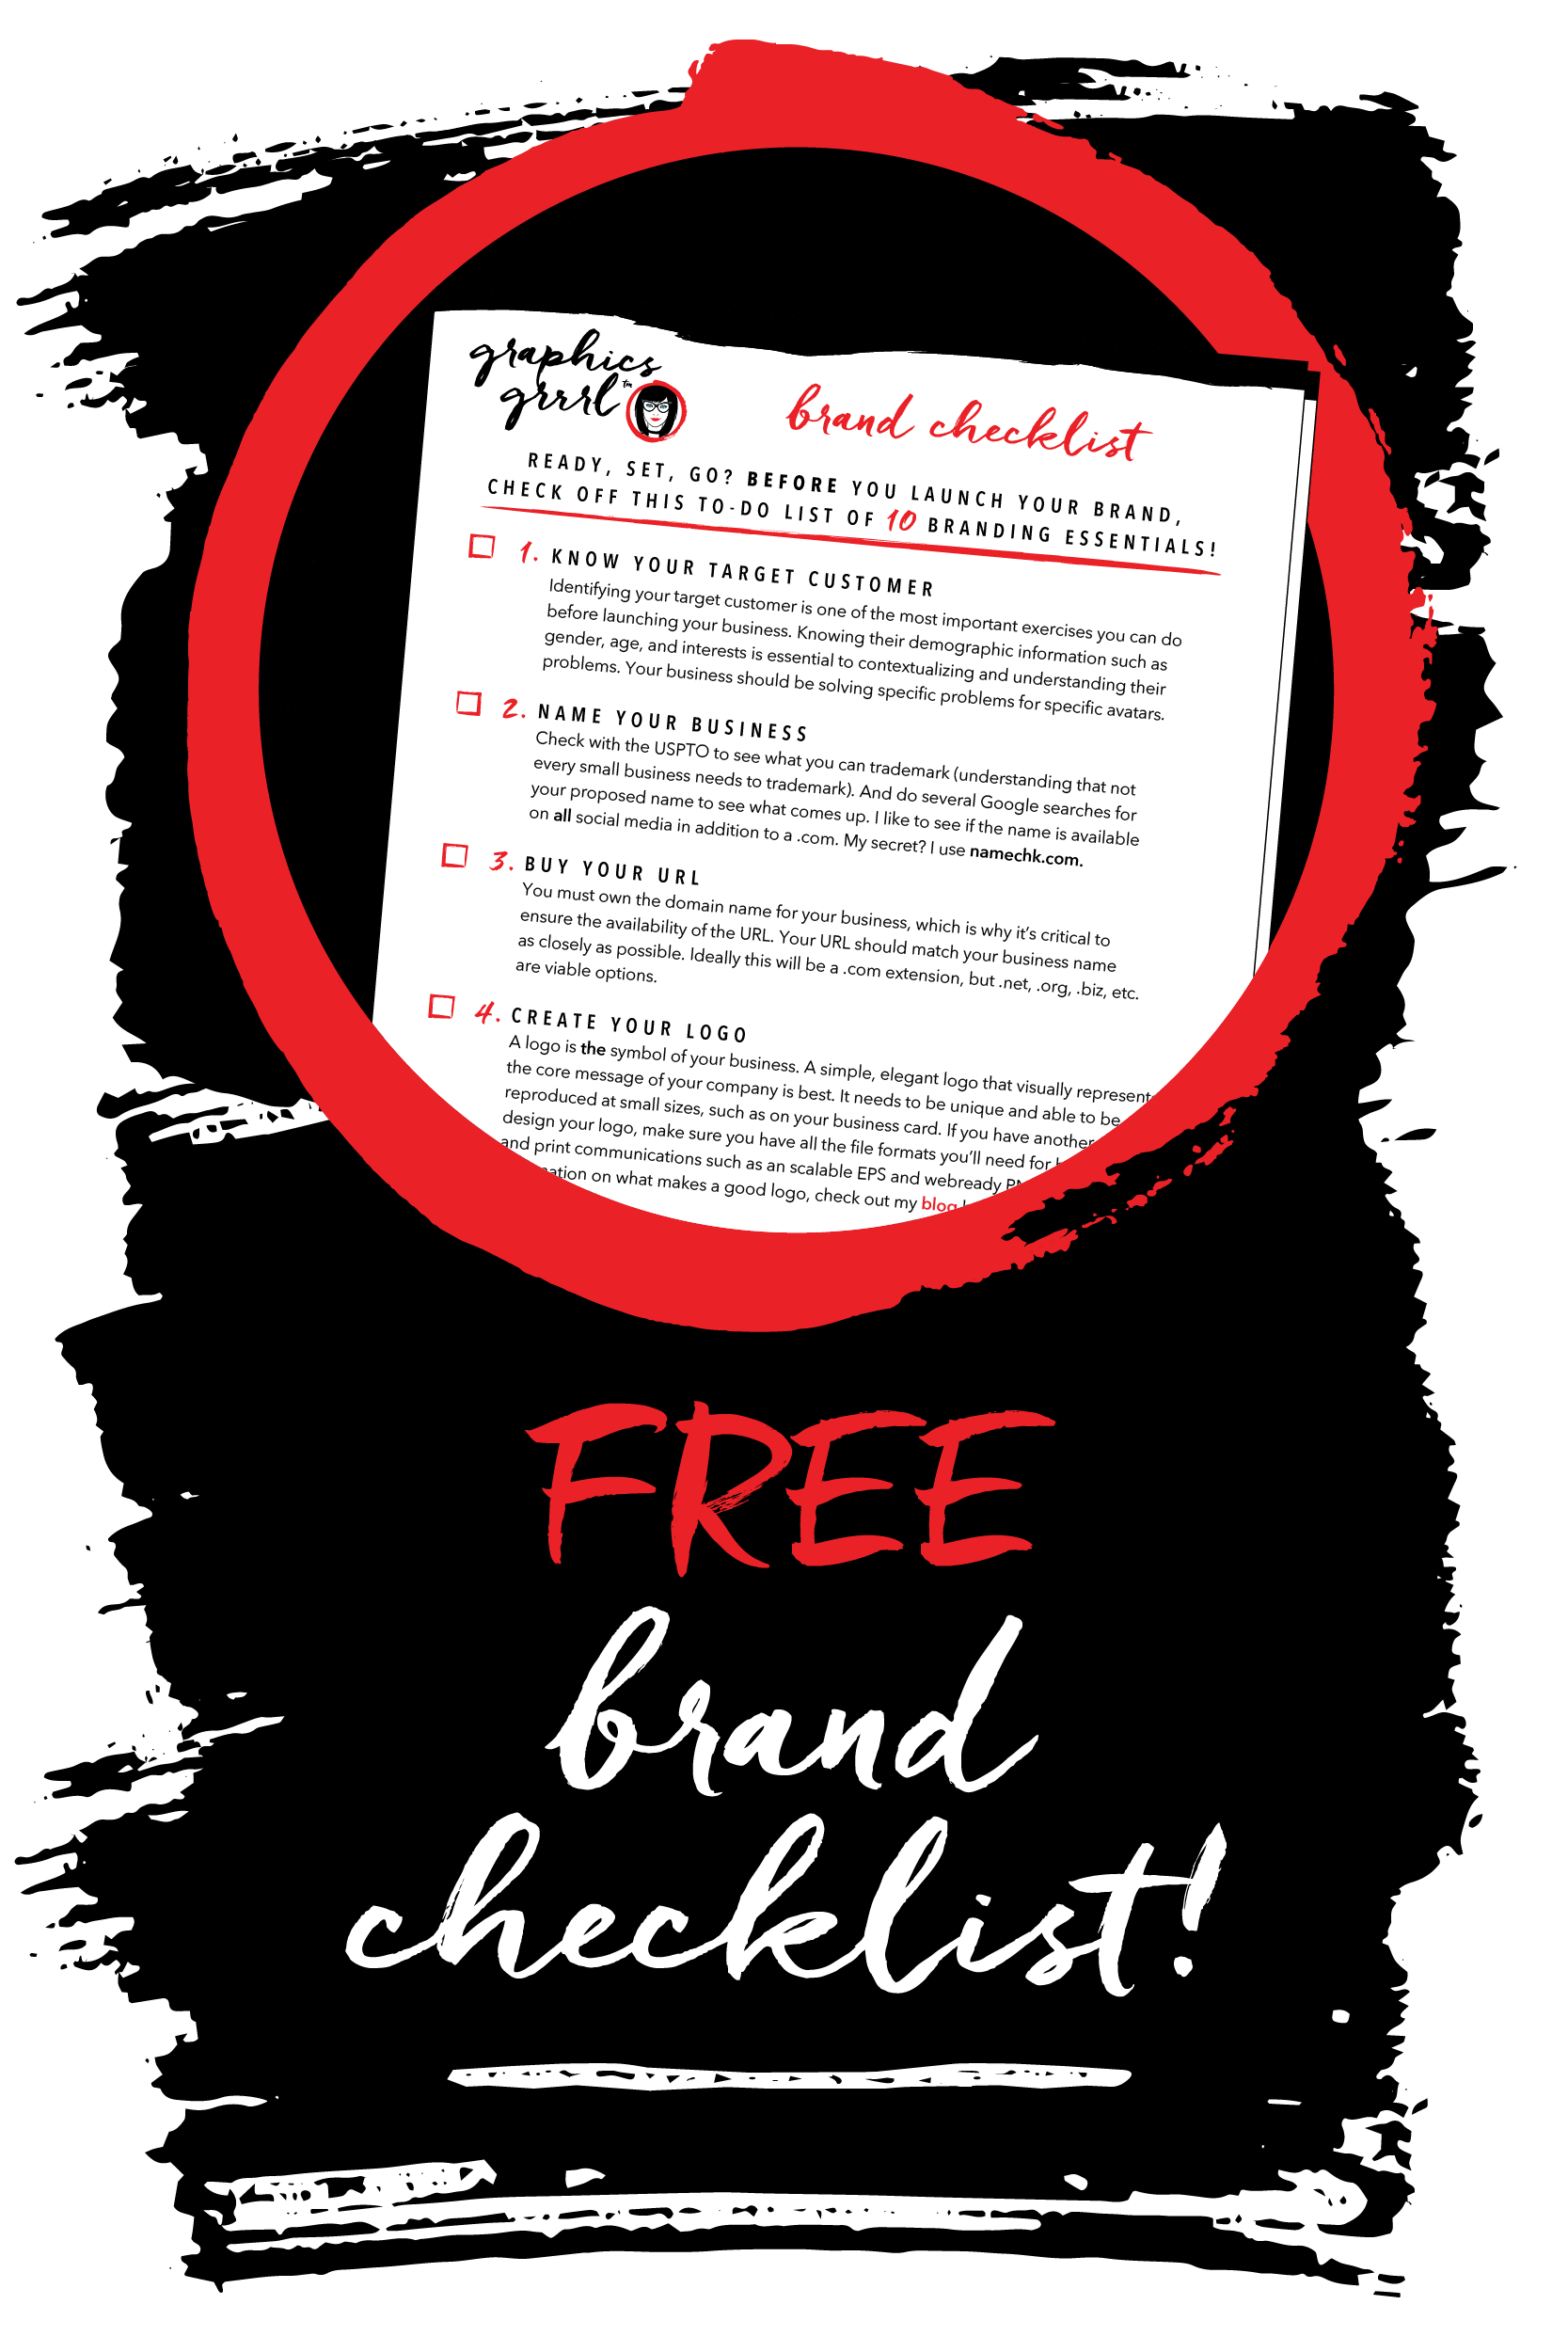 trim, bleed & safety! Click through to get your FREE 10-point brand checklist with everything you need to before launching your brand!~graphics grrrl